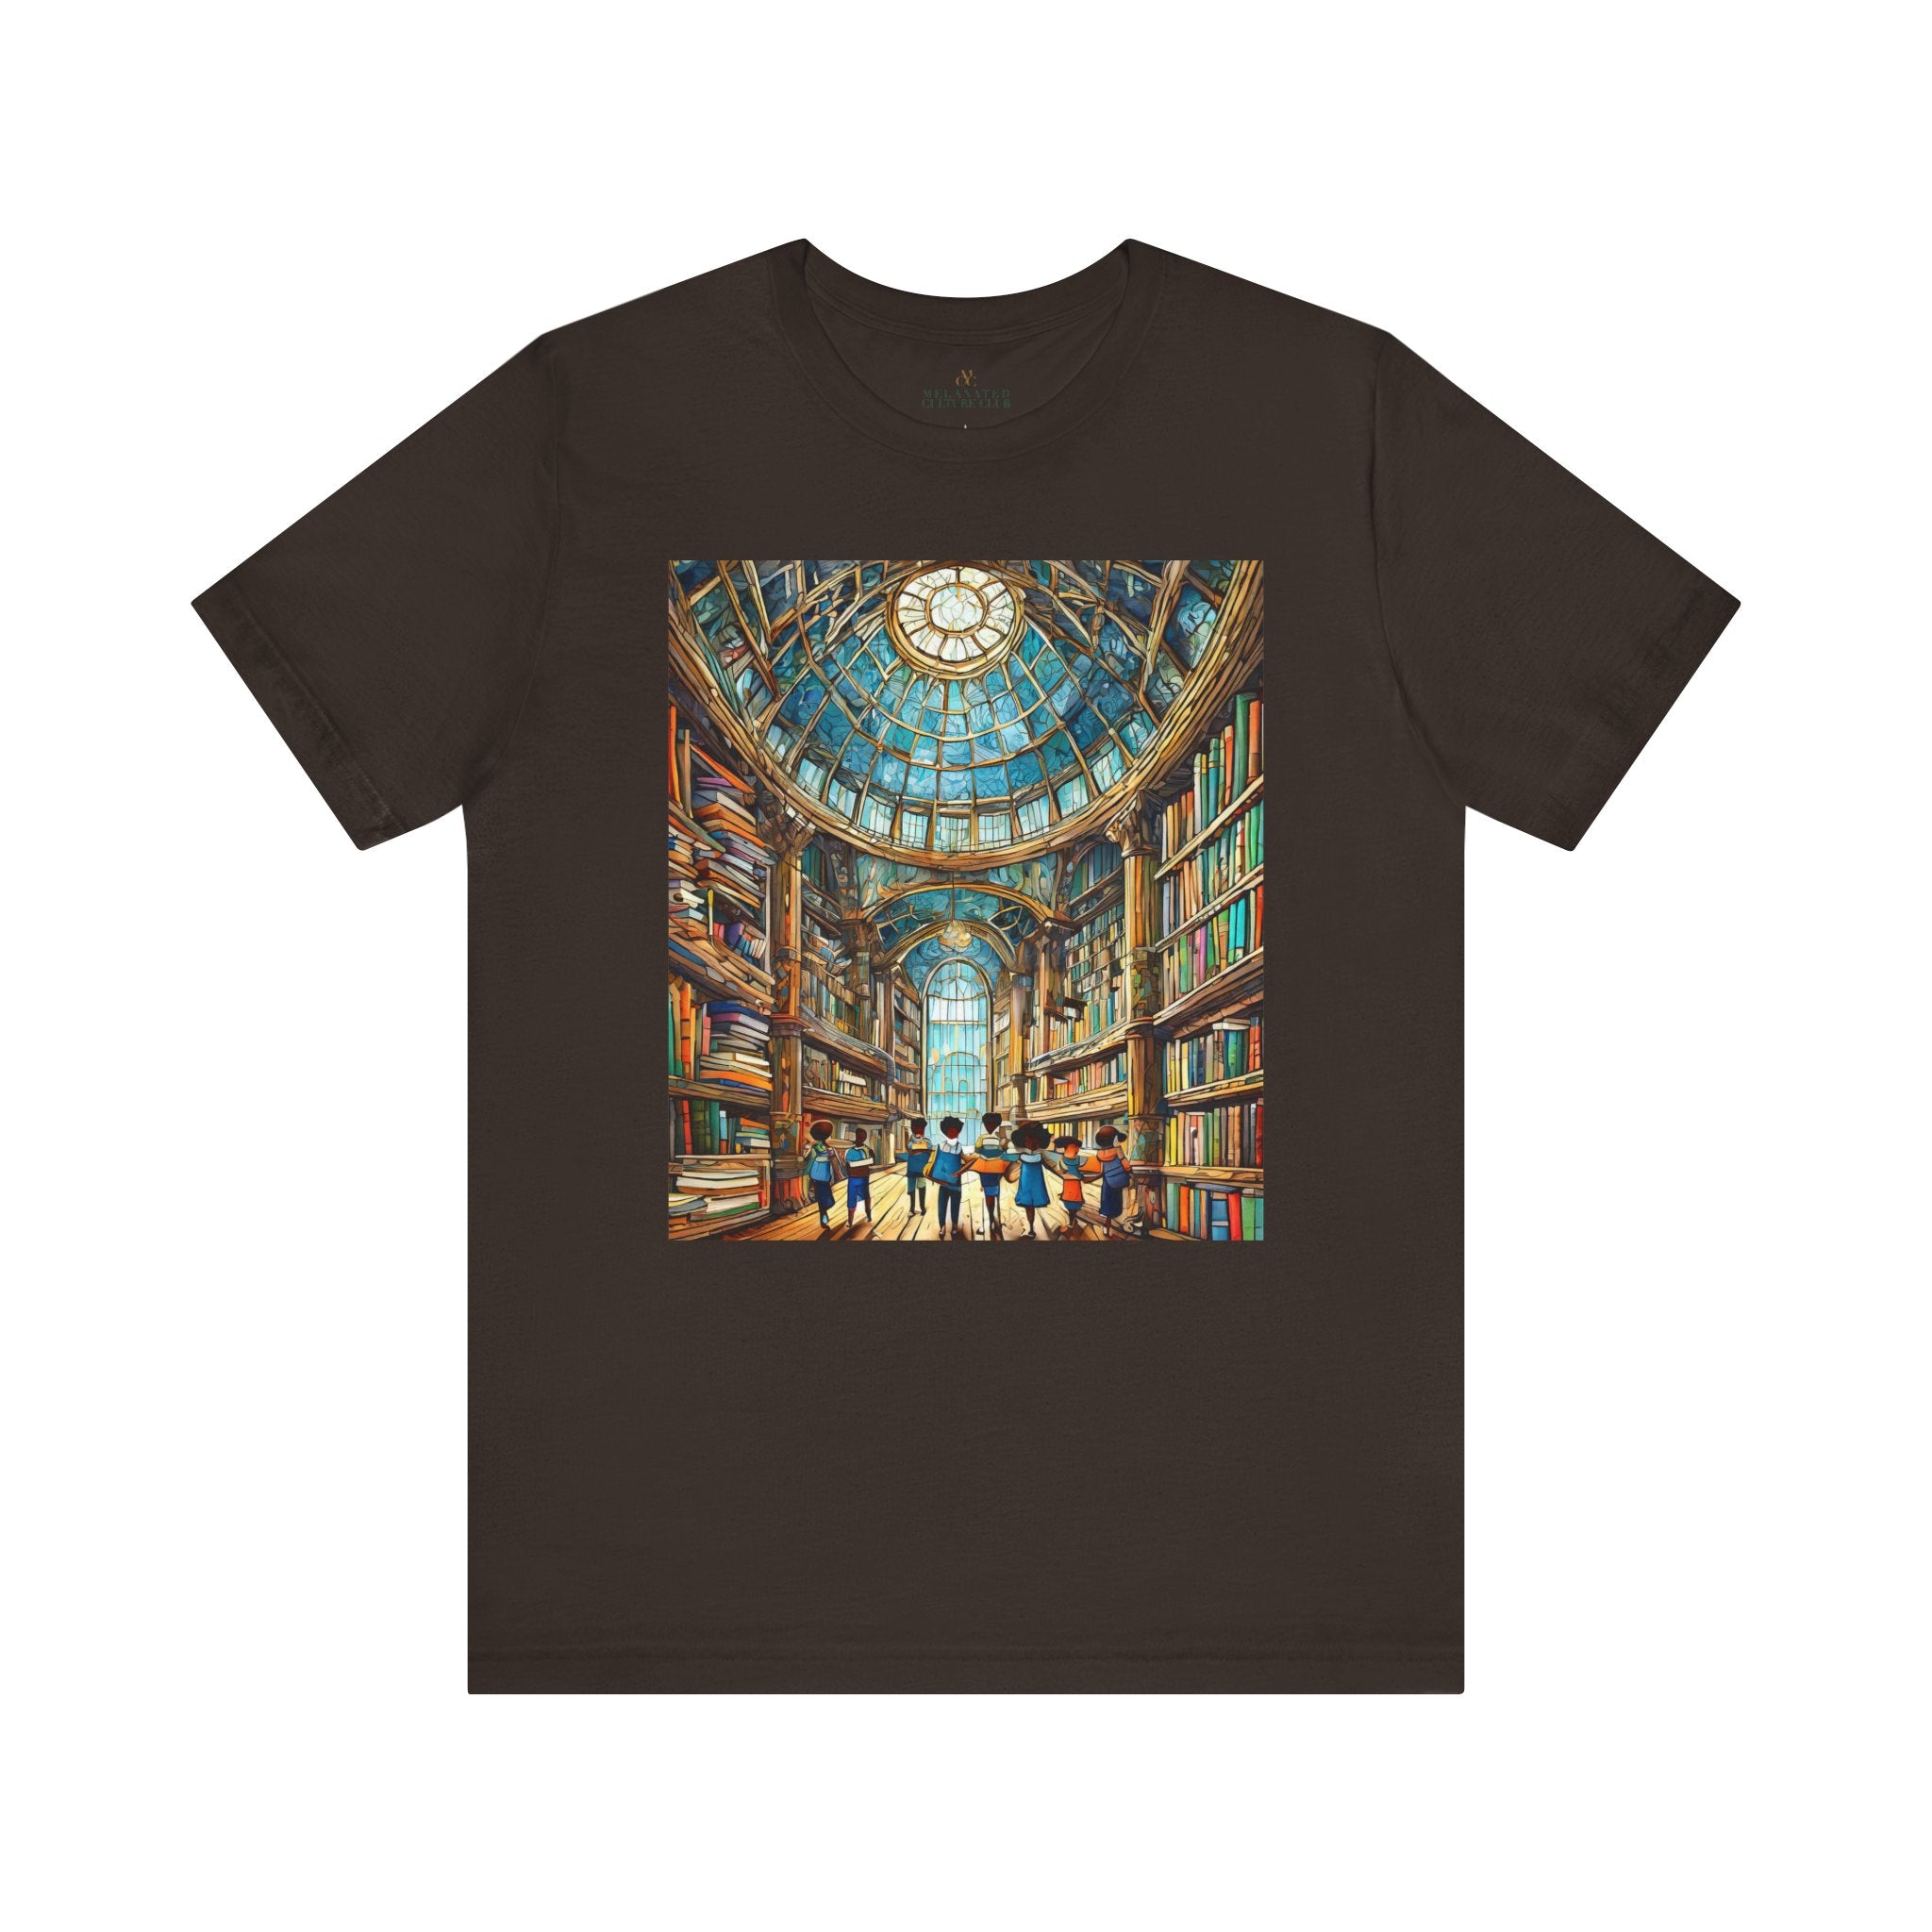 African American Kids at Library Tee shirt in brown.